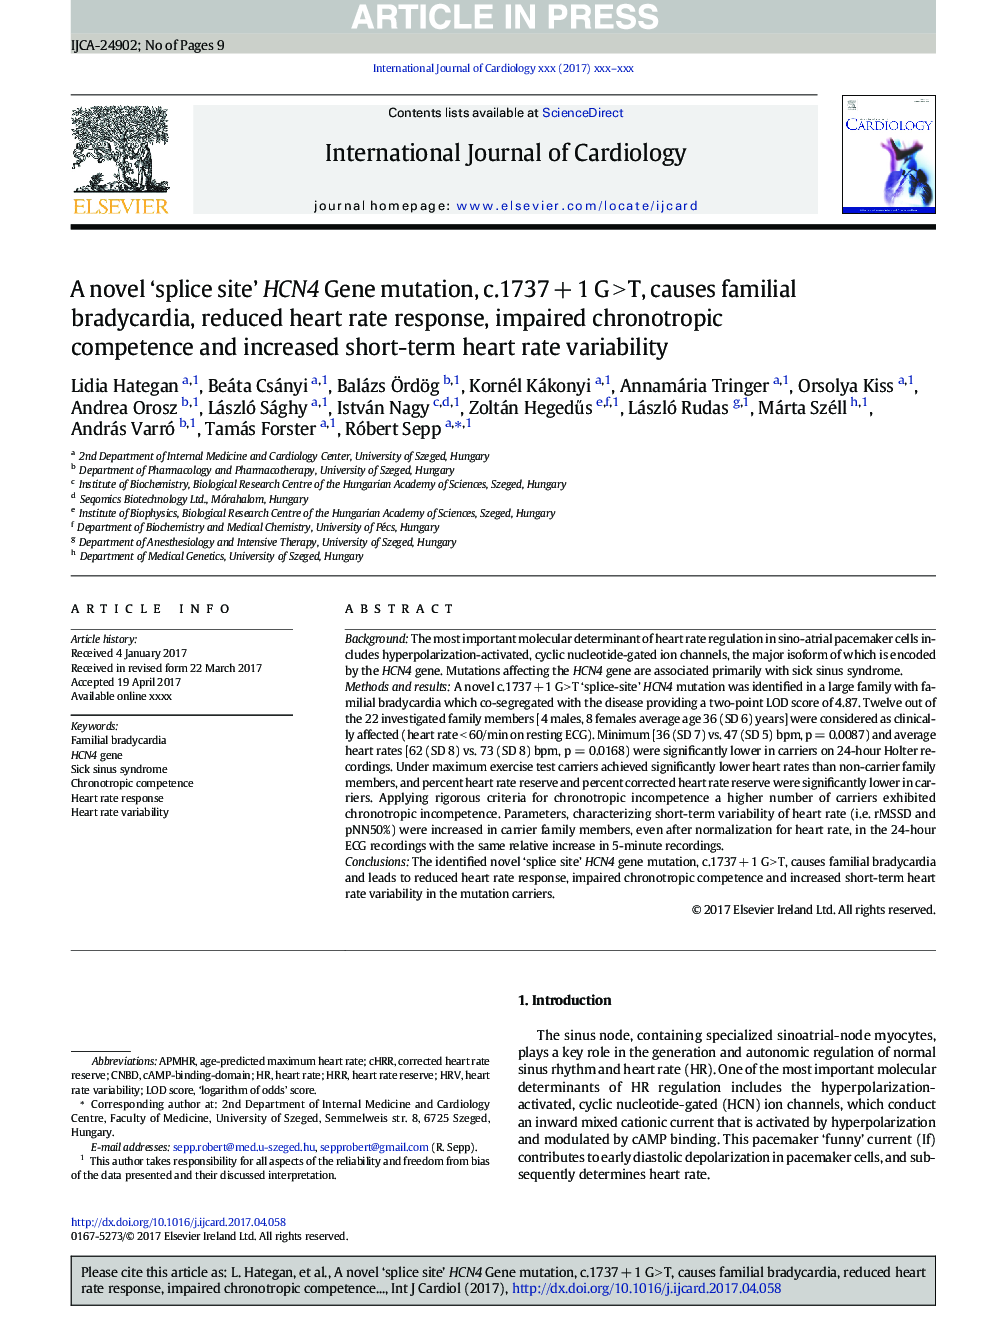 A novel 'splice site' HCN4 Gene mutation, c.1737Â +Â 1 GÂ >Â T, causes familial bradycardia, reduced heart rate response, impaired chronotropic competence and increased short-term heart rate variability